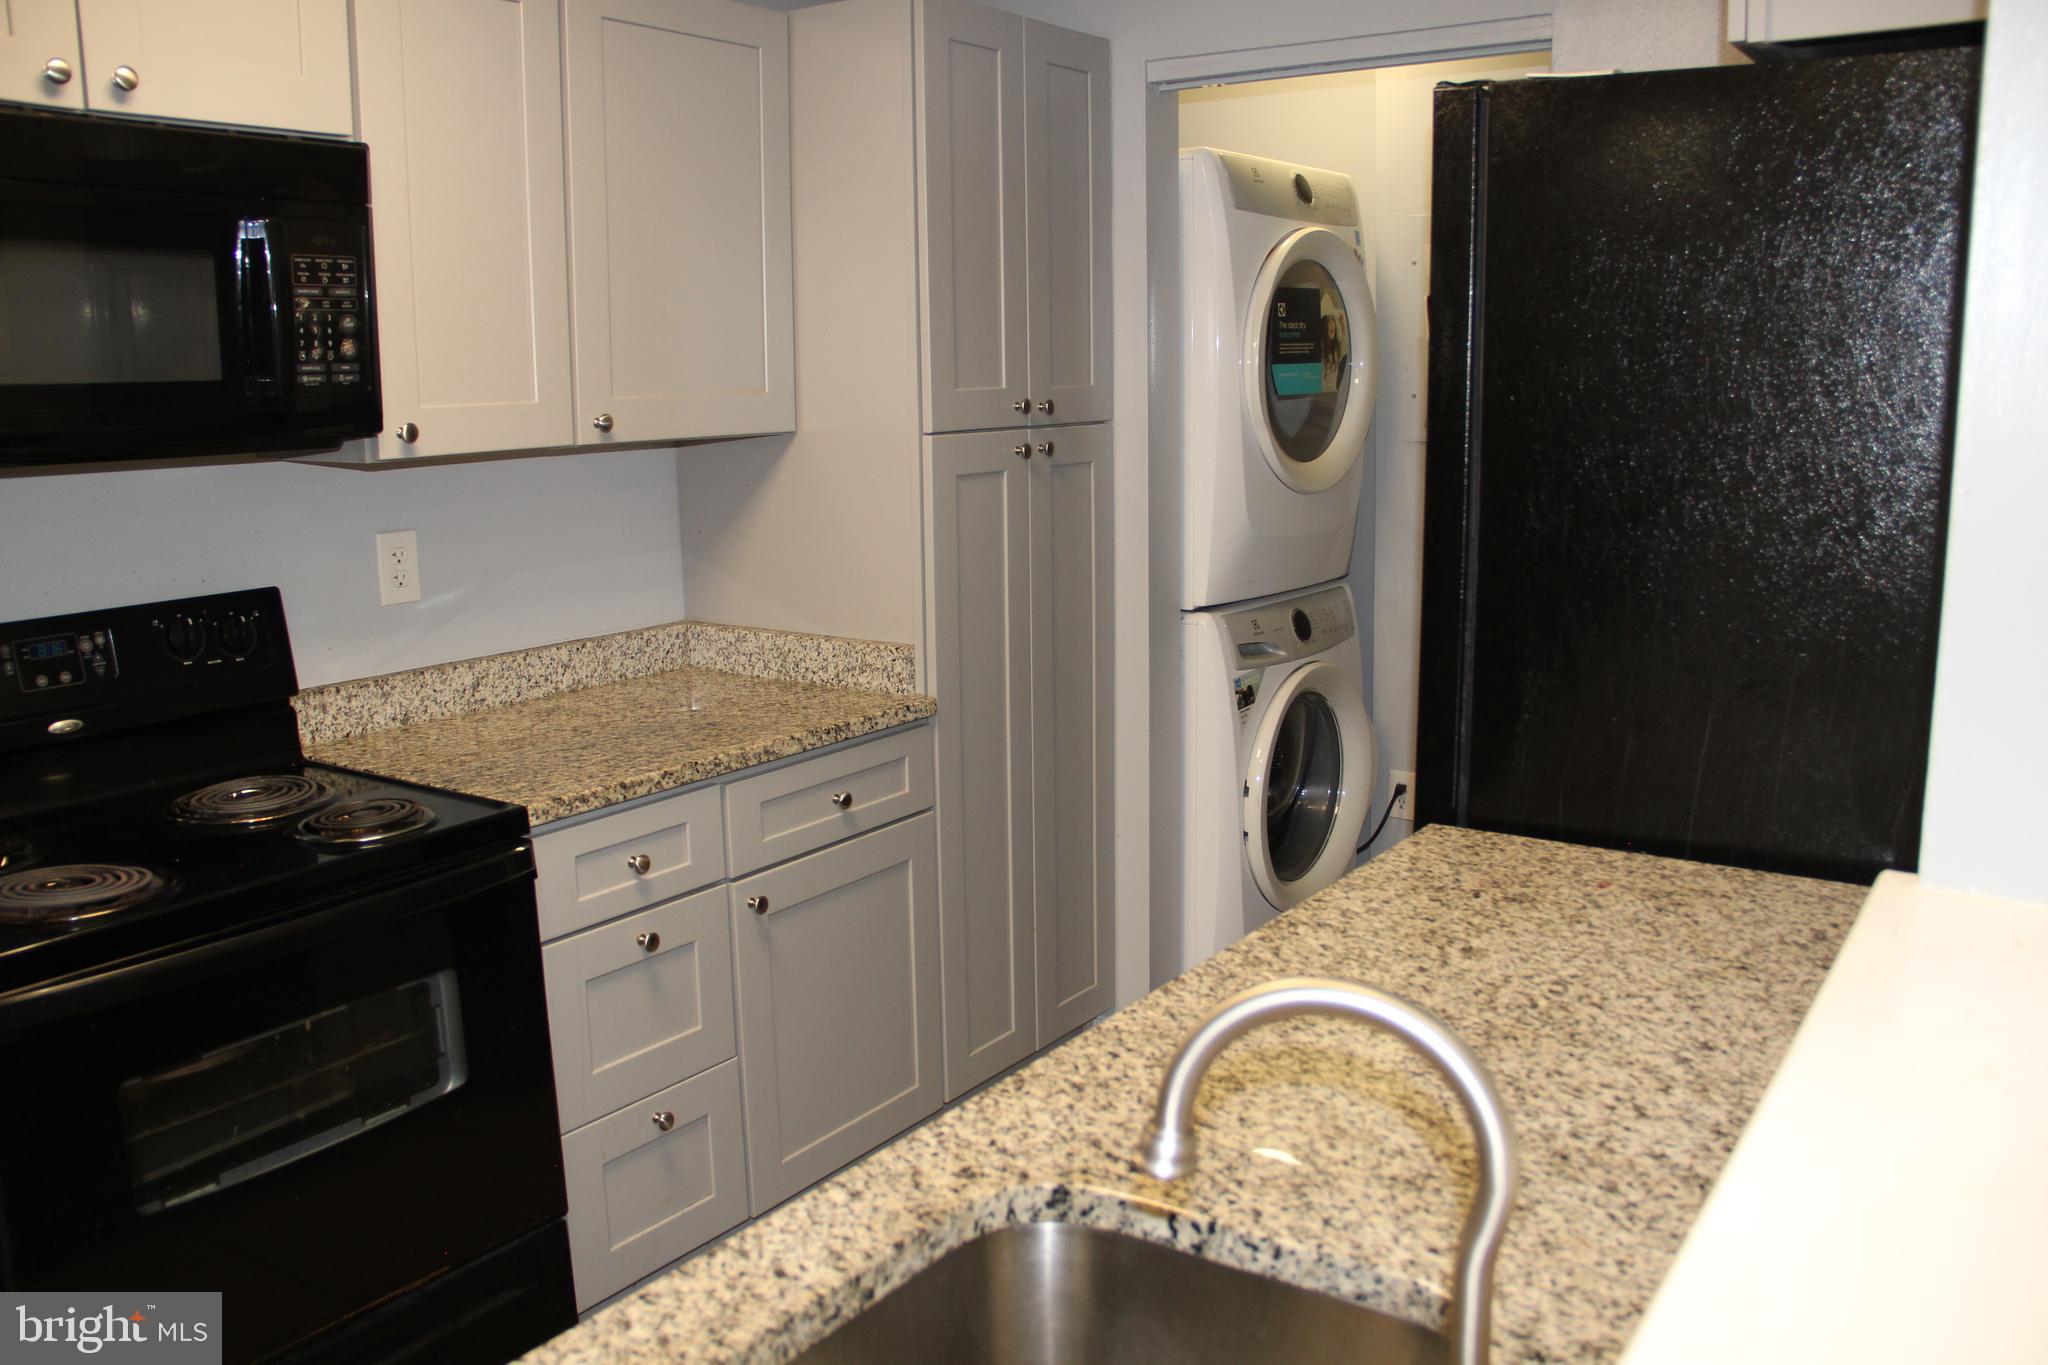 a view of a kitchen with washer and dryer